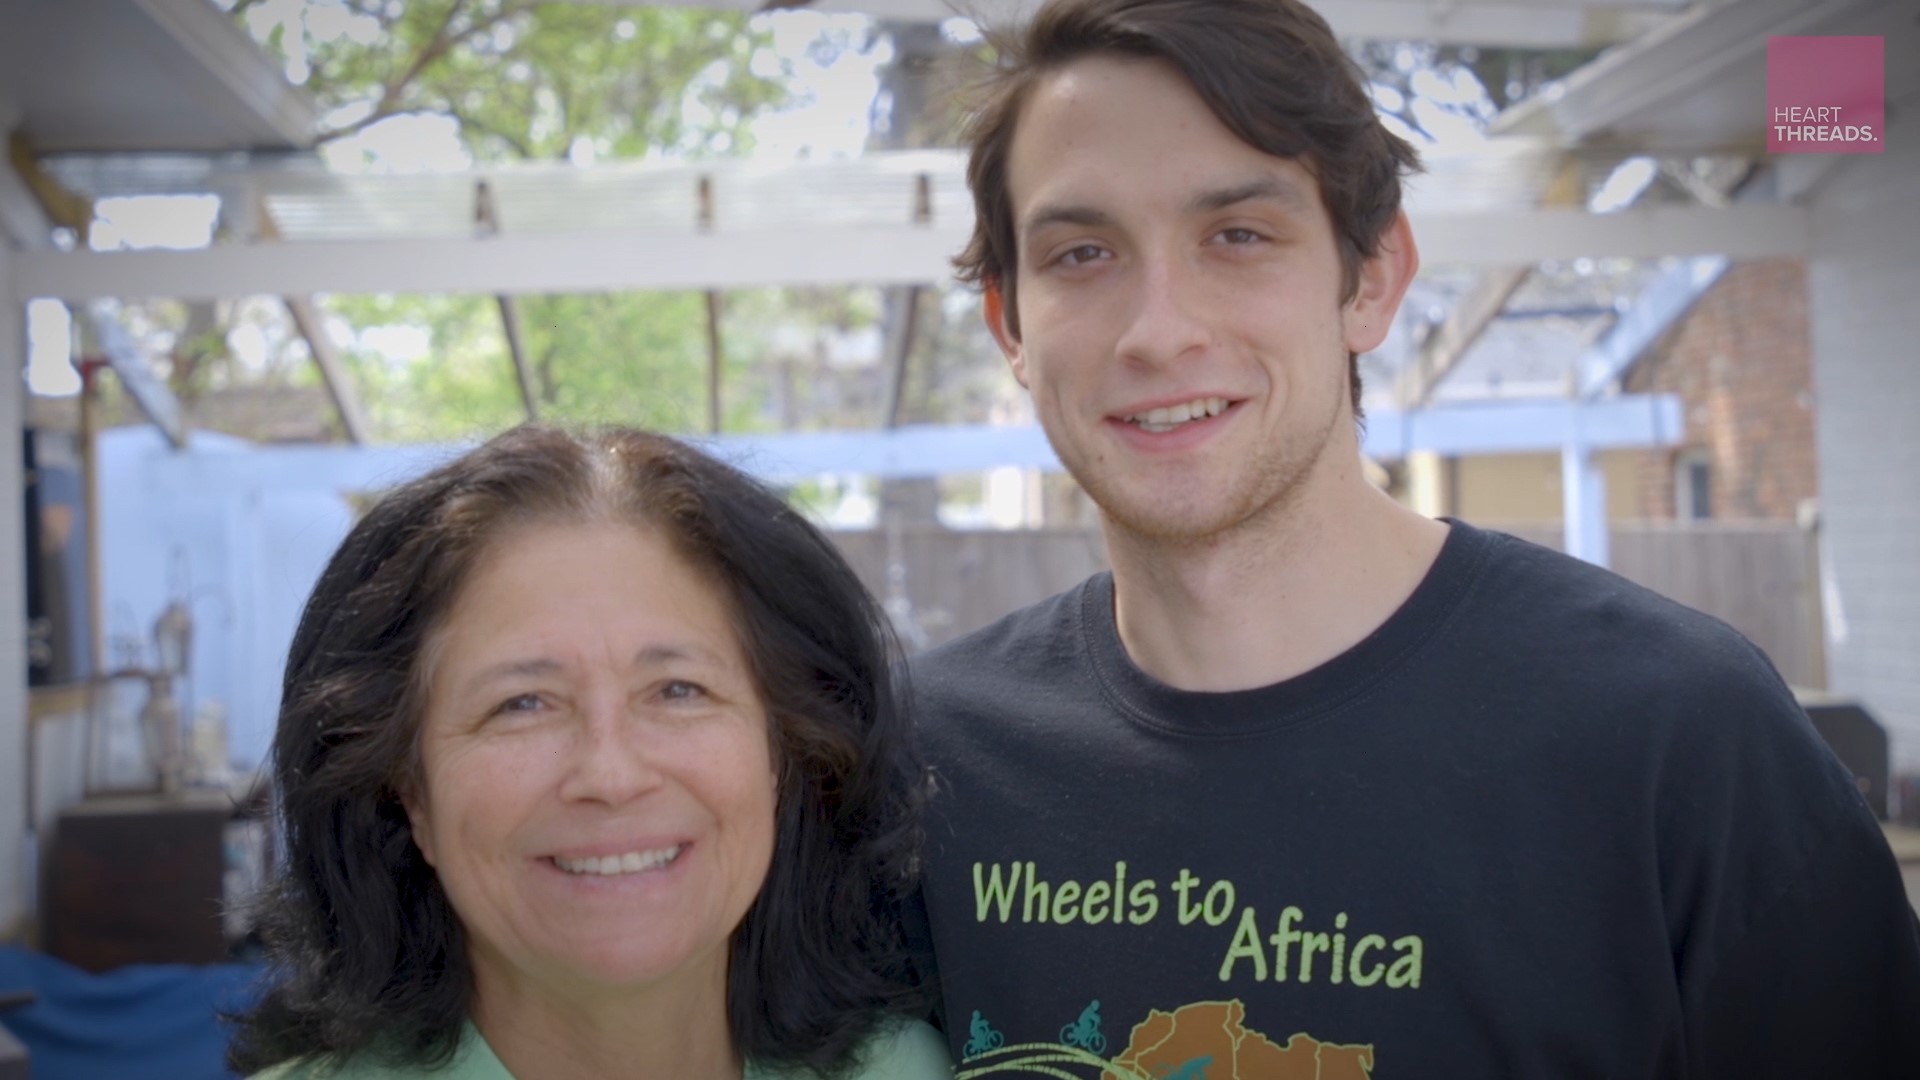 During his first trip to Africa, 10-year-old Winston saw a woman who reminded him of his grandmother walking for miles and miles. He was determined to help. Fifteen years later, he and his mother have brought over 10,000 bikes to Africa.